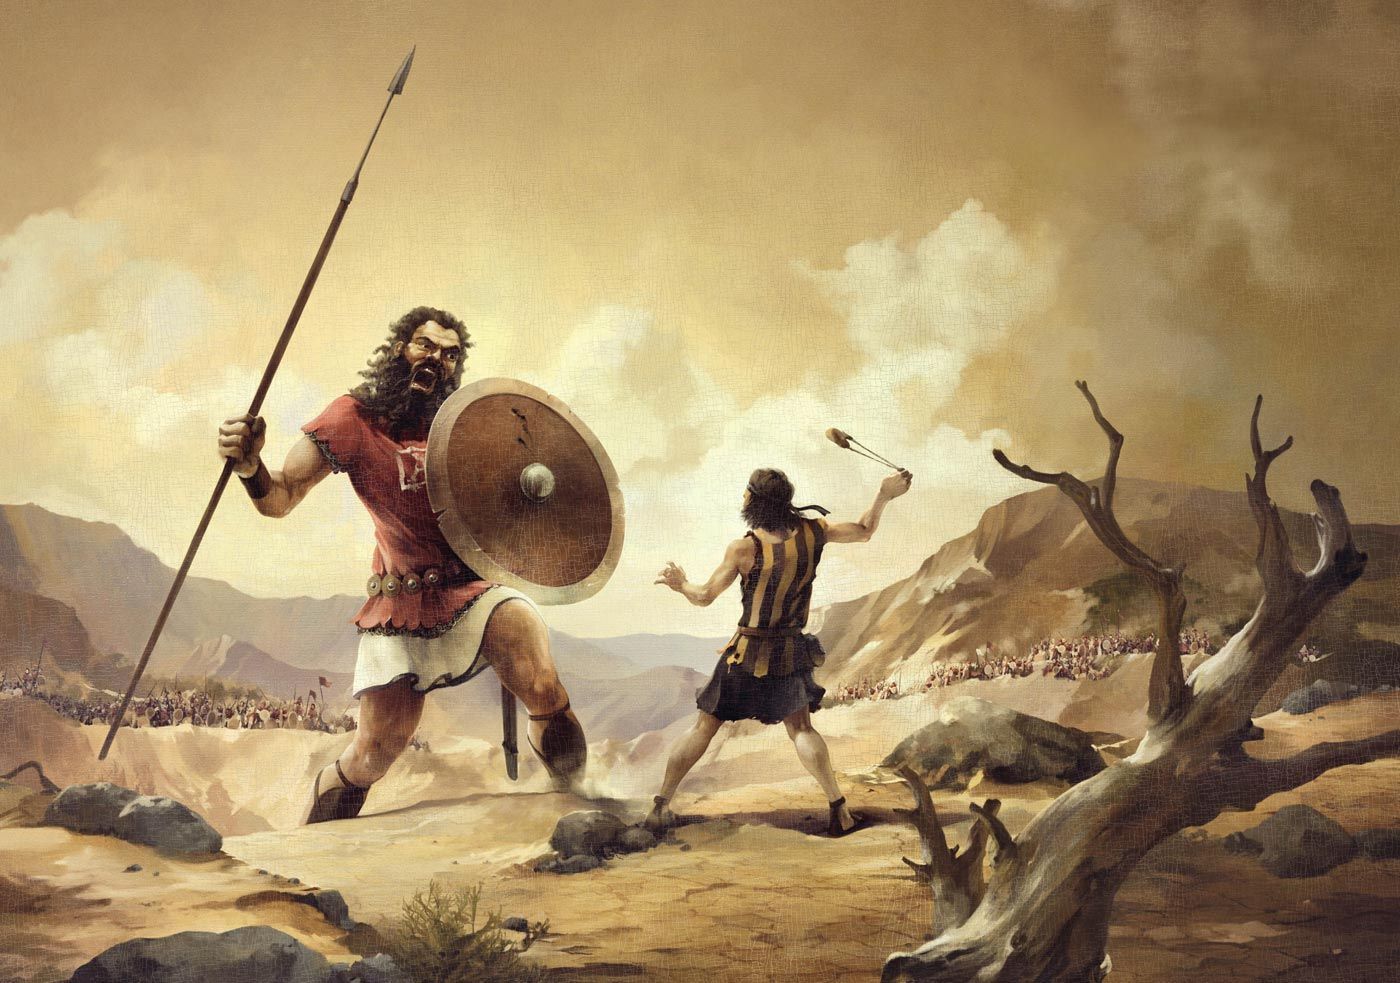 Any GIANTS in your life?. Giants in the bible, David and goliath, David vs goliath